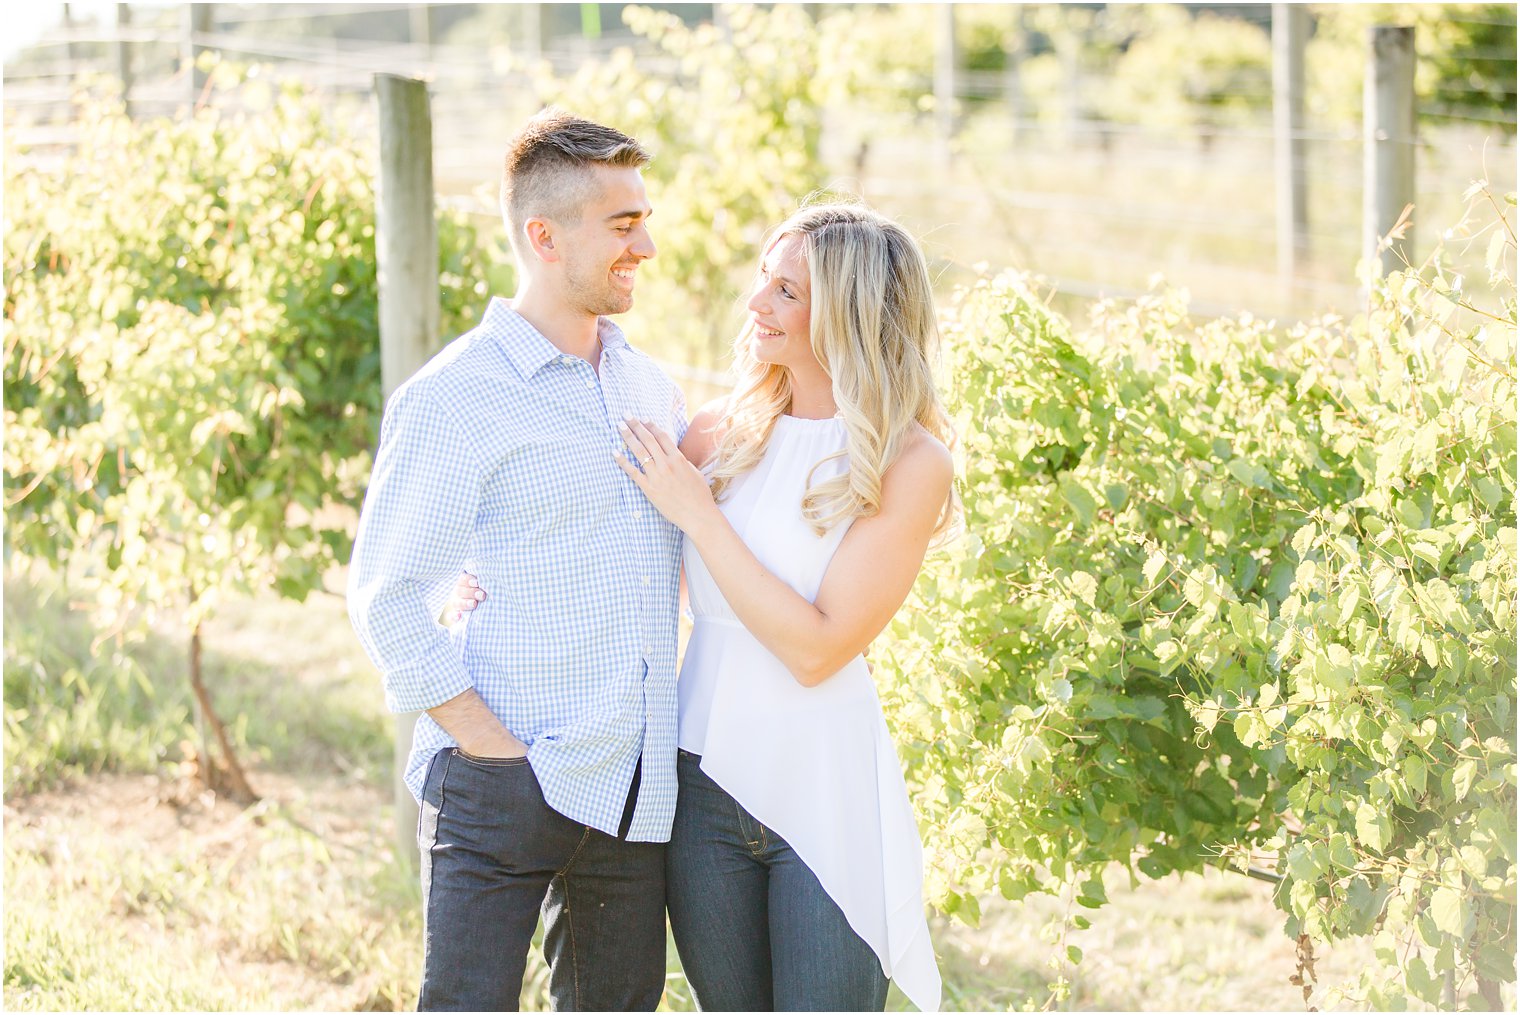 New Jersey winery engagement session photographed by Idalia Photography